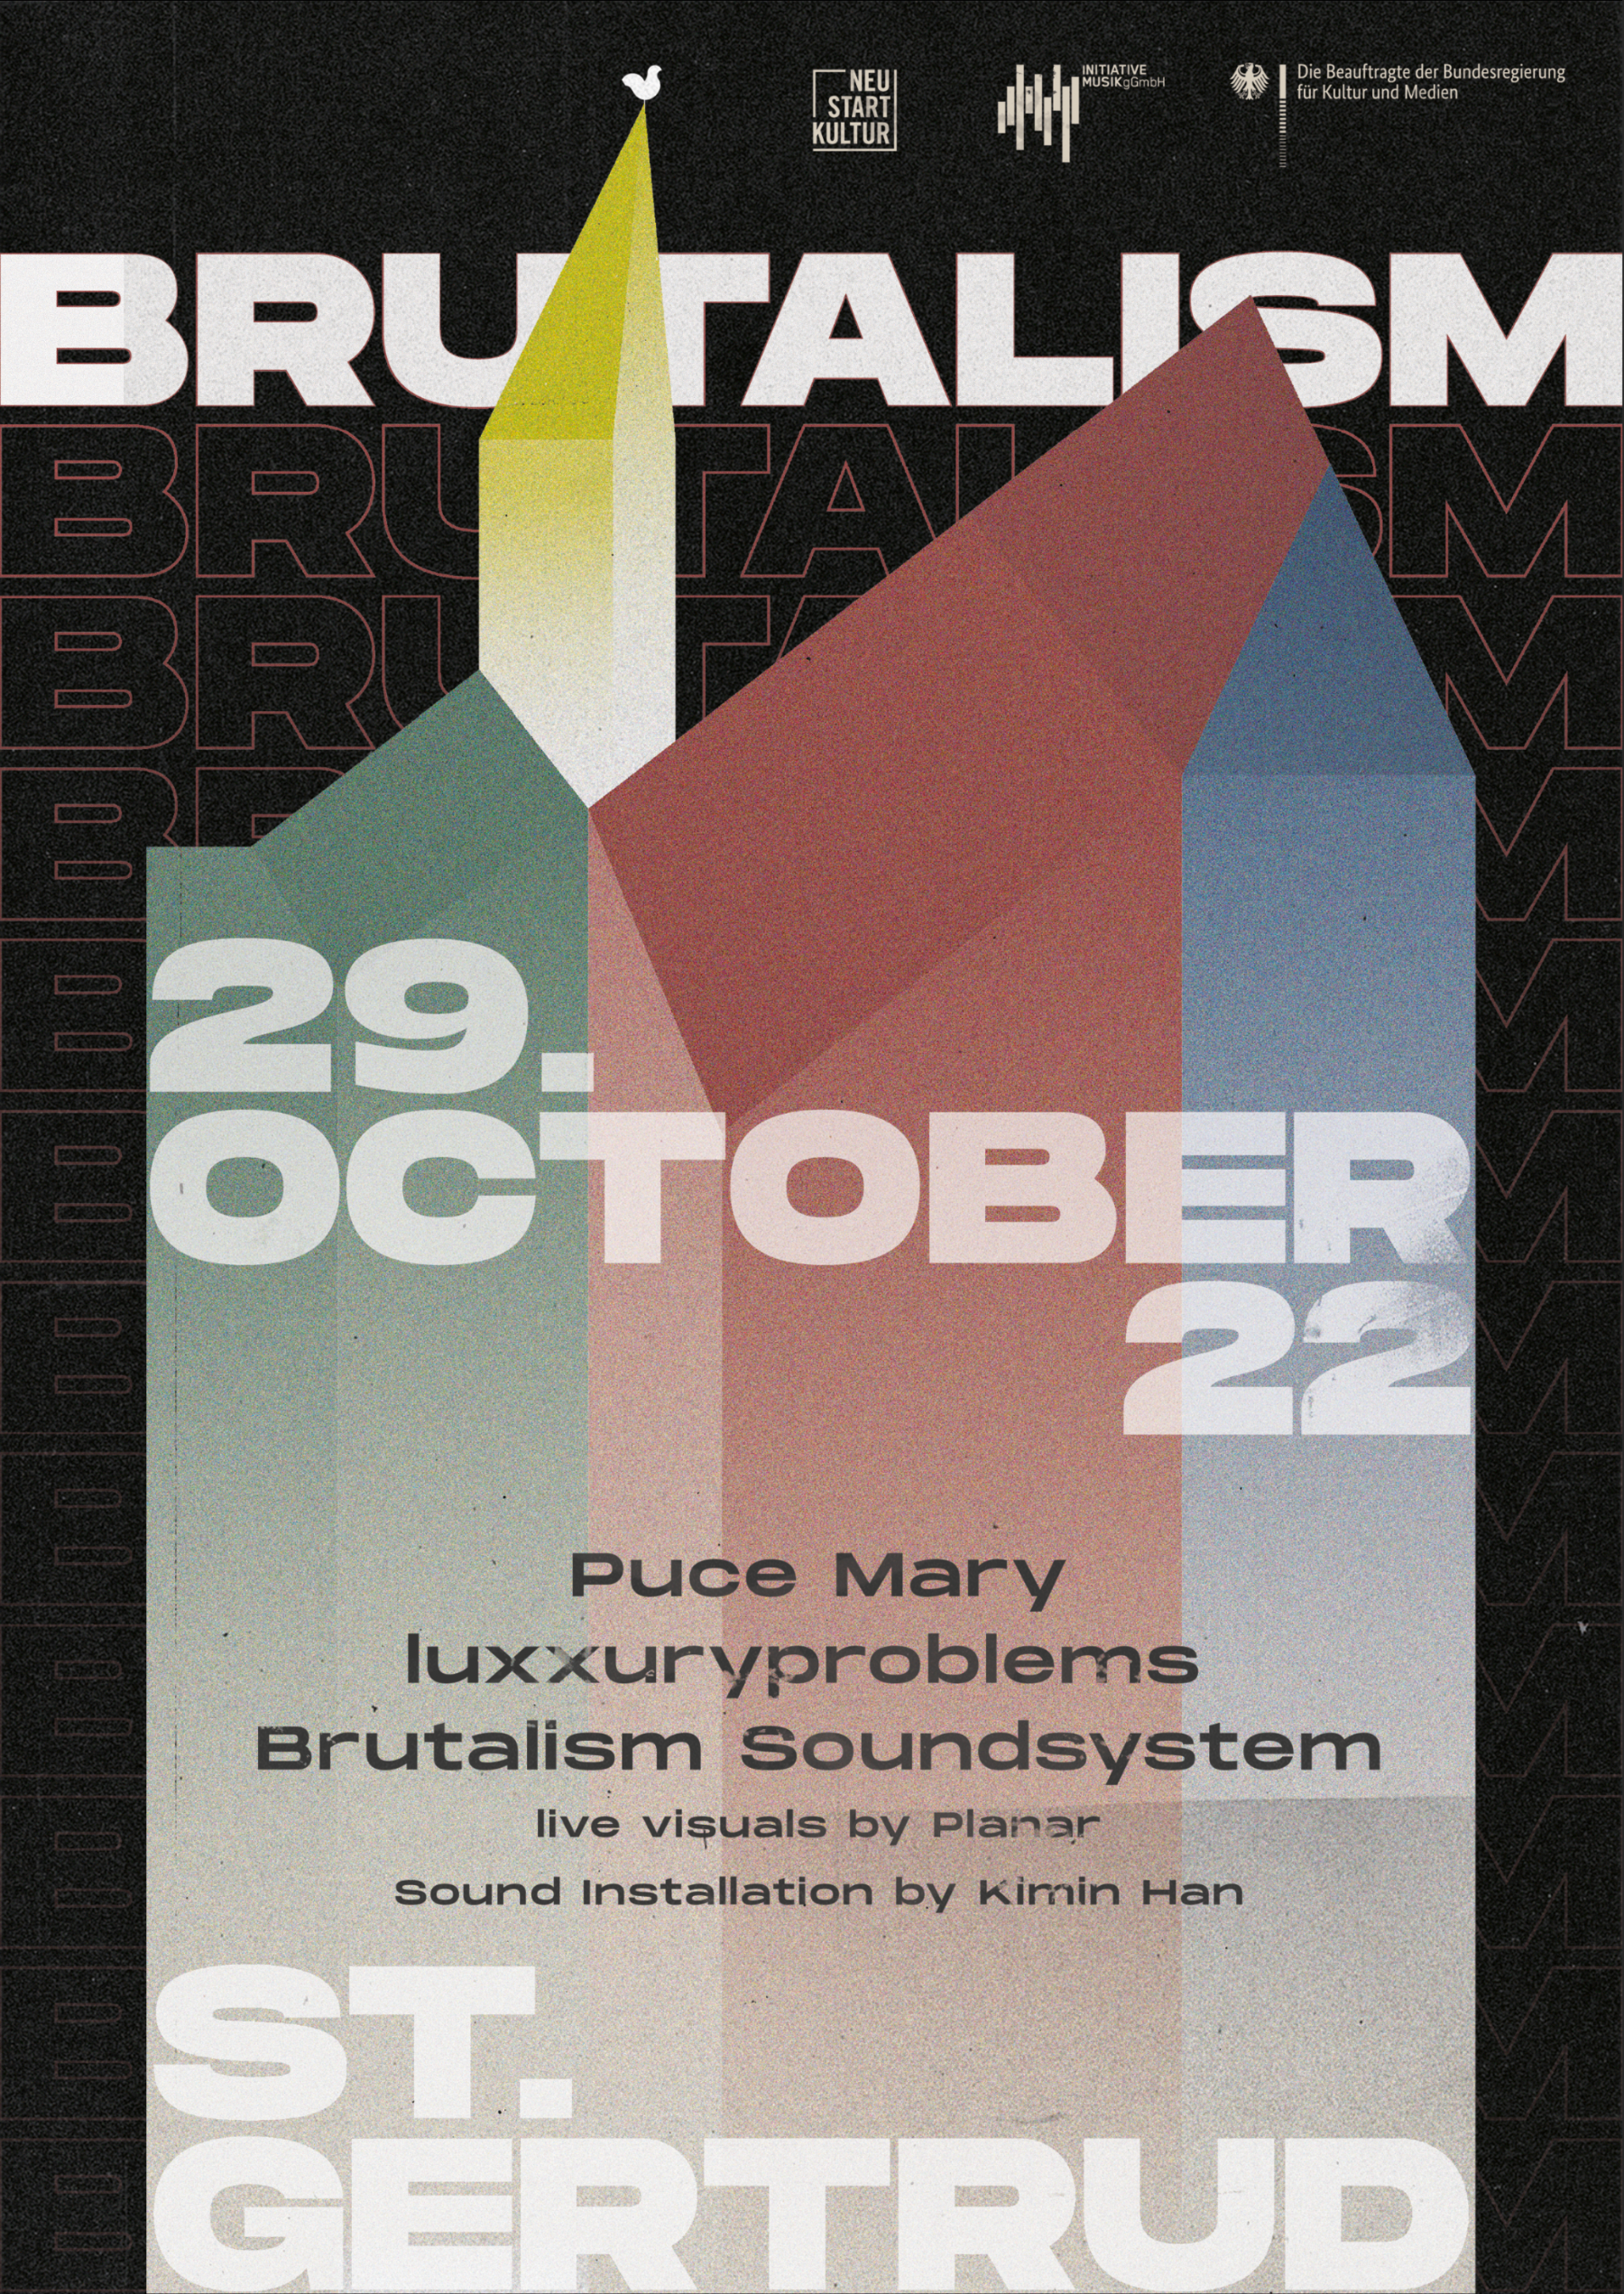 Brutalism presents Puce Mary & luxxuryproblems at St. Gertrud - Página frontal